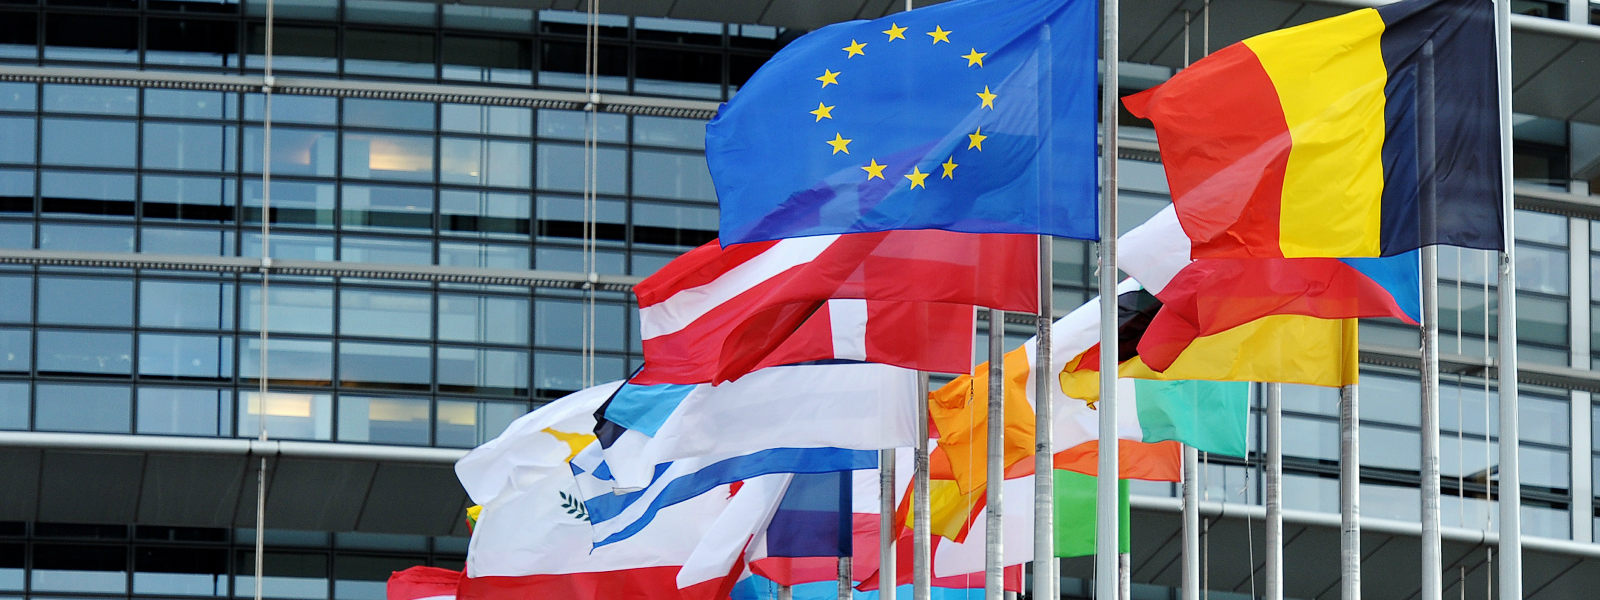 EU to further promote defense cooperation